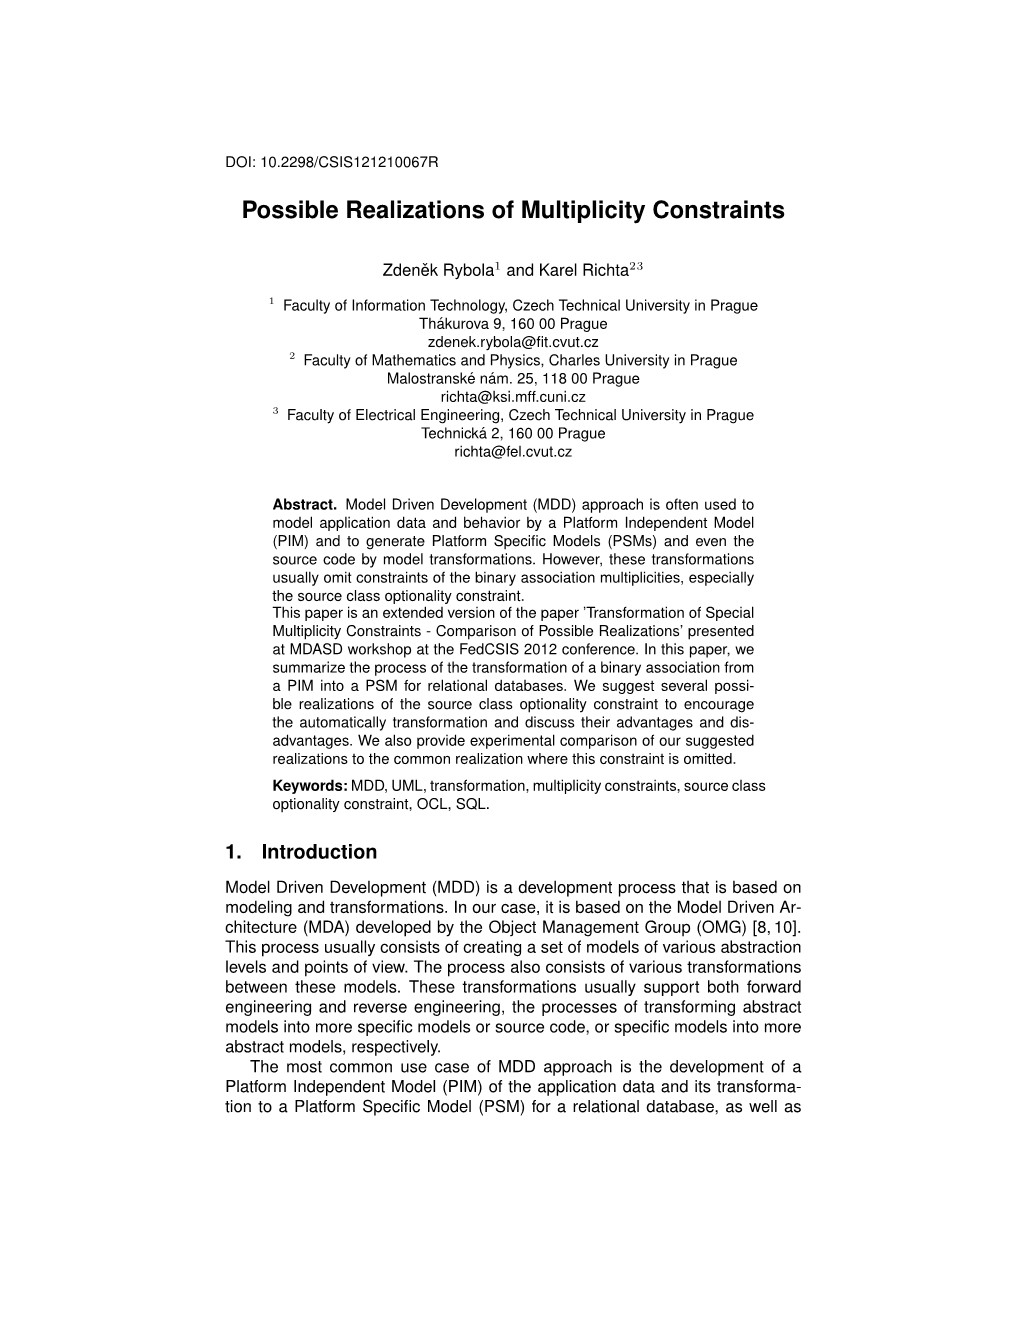 Possible Realizations of Multiplicity Constraints